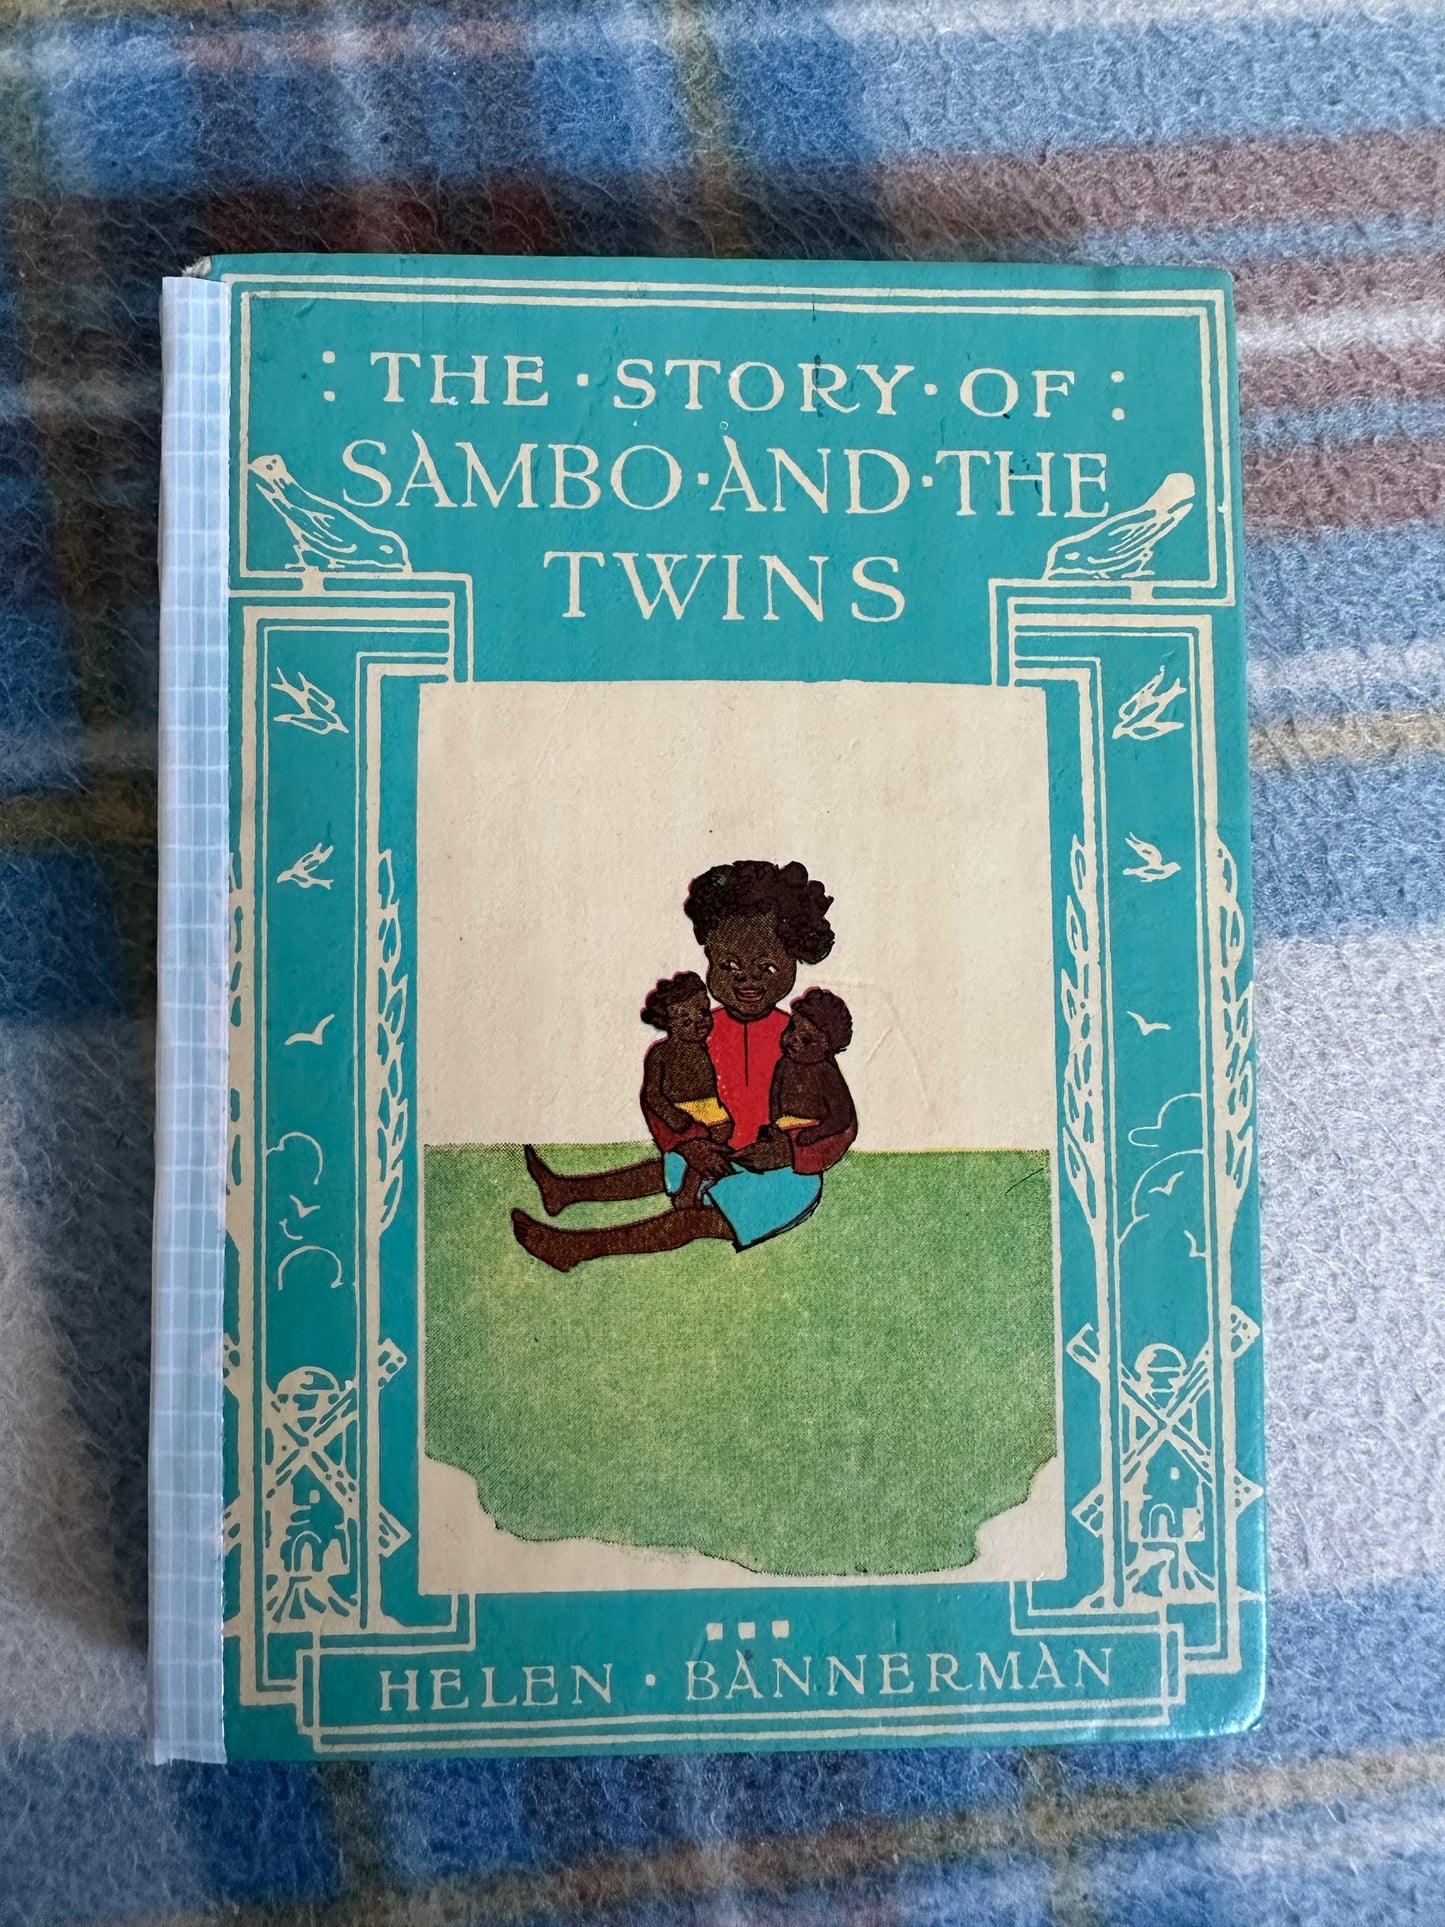 1975 The Story Of Sambo & The Twins - Helen Bannerman(Chatto & Windus)